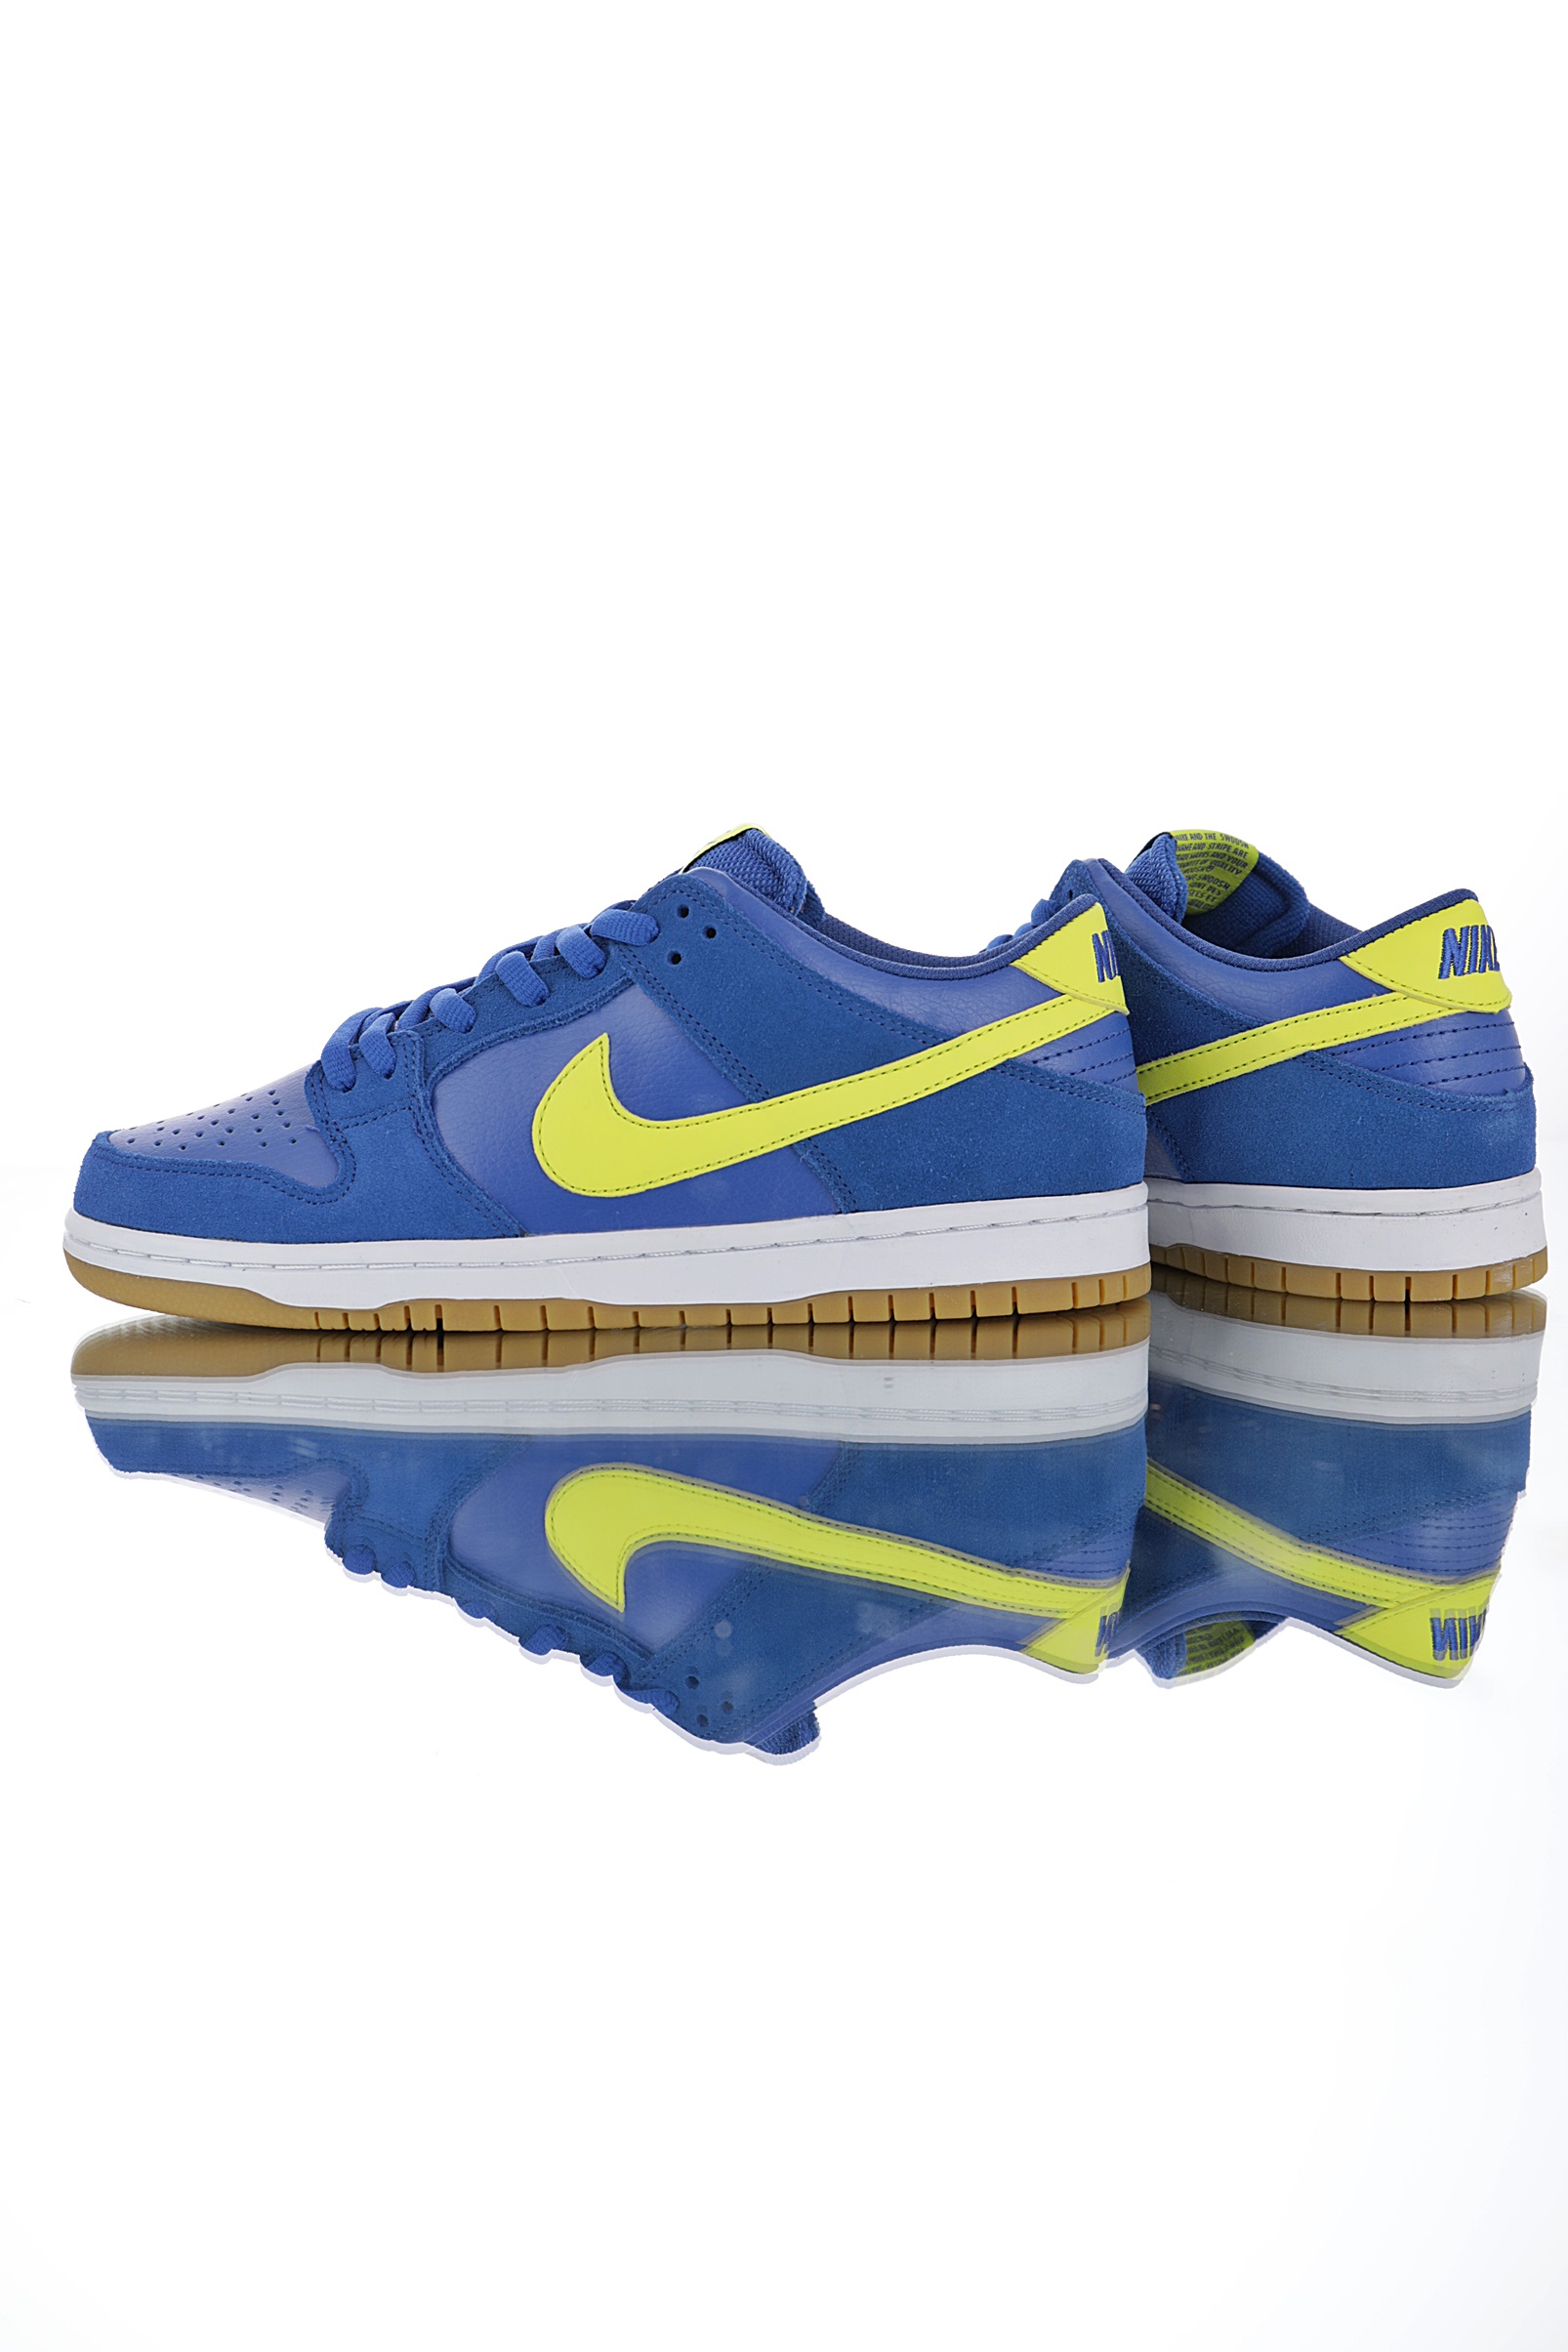 nike dunk blue and yellow